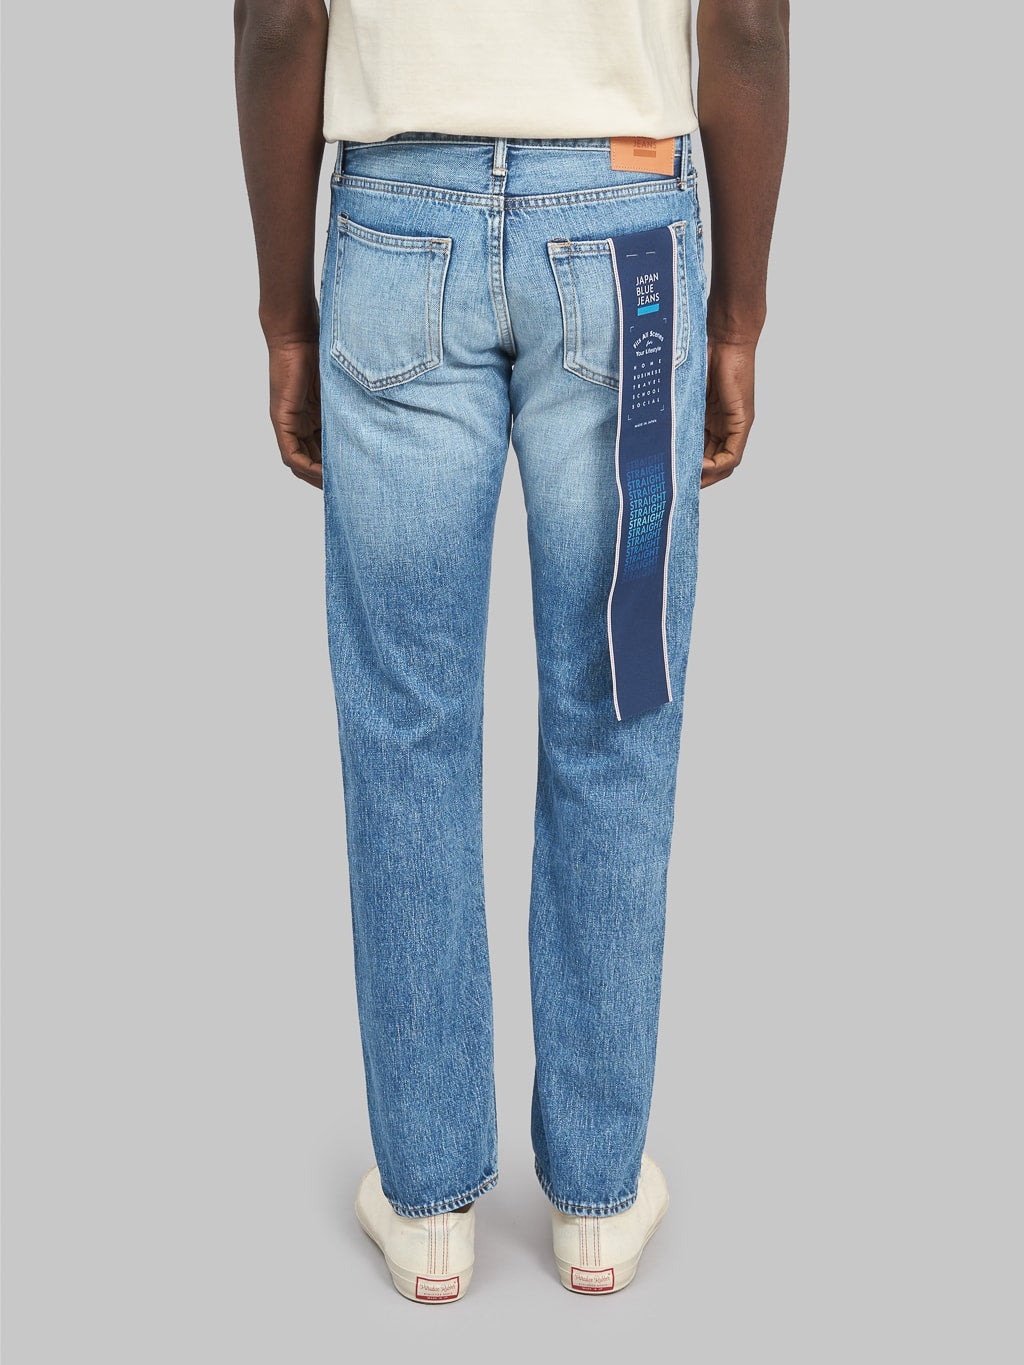 Japan Blue J304 Africa cotton Stonewashed Straight Jeans back rise